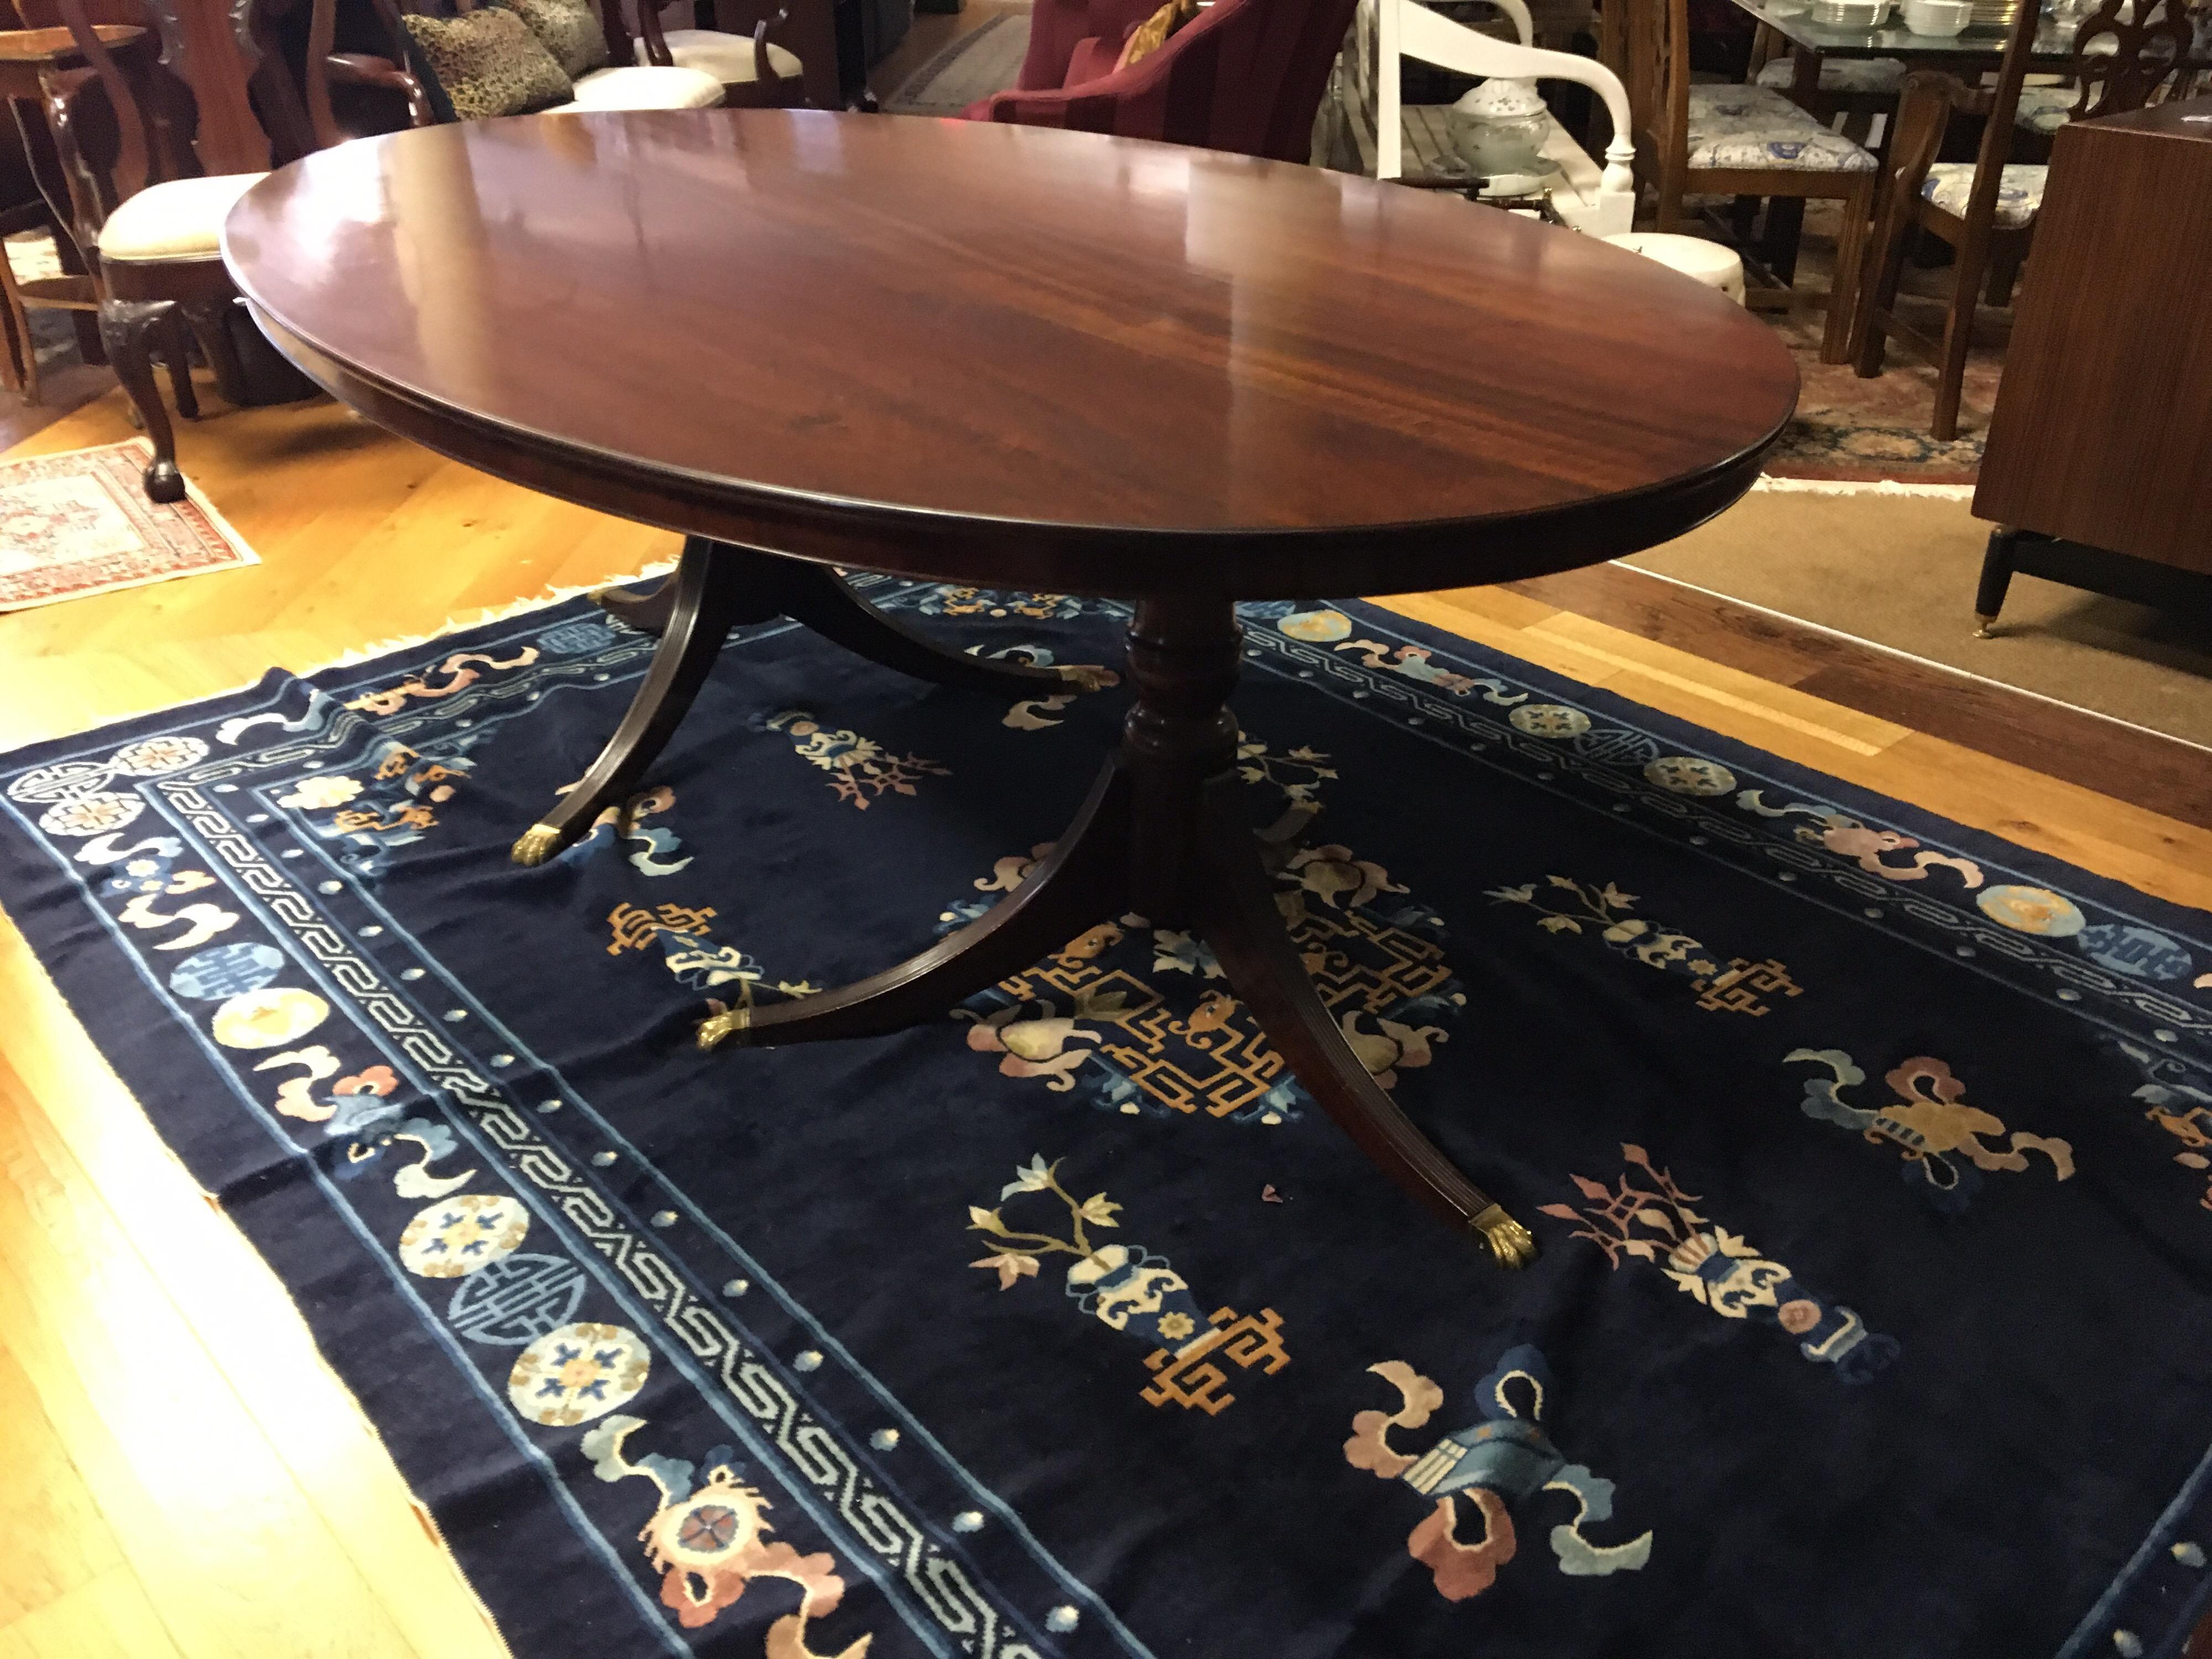 England, mid-19th century stunner, this mahogany Georgian oval table is sure to impress. Top is one piece of wood and rests on double pedestals with brass feet. No leaves.